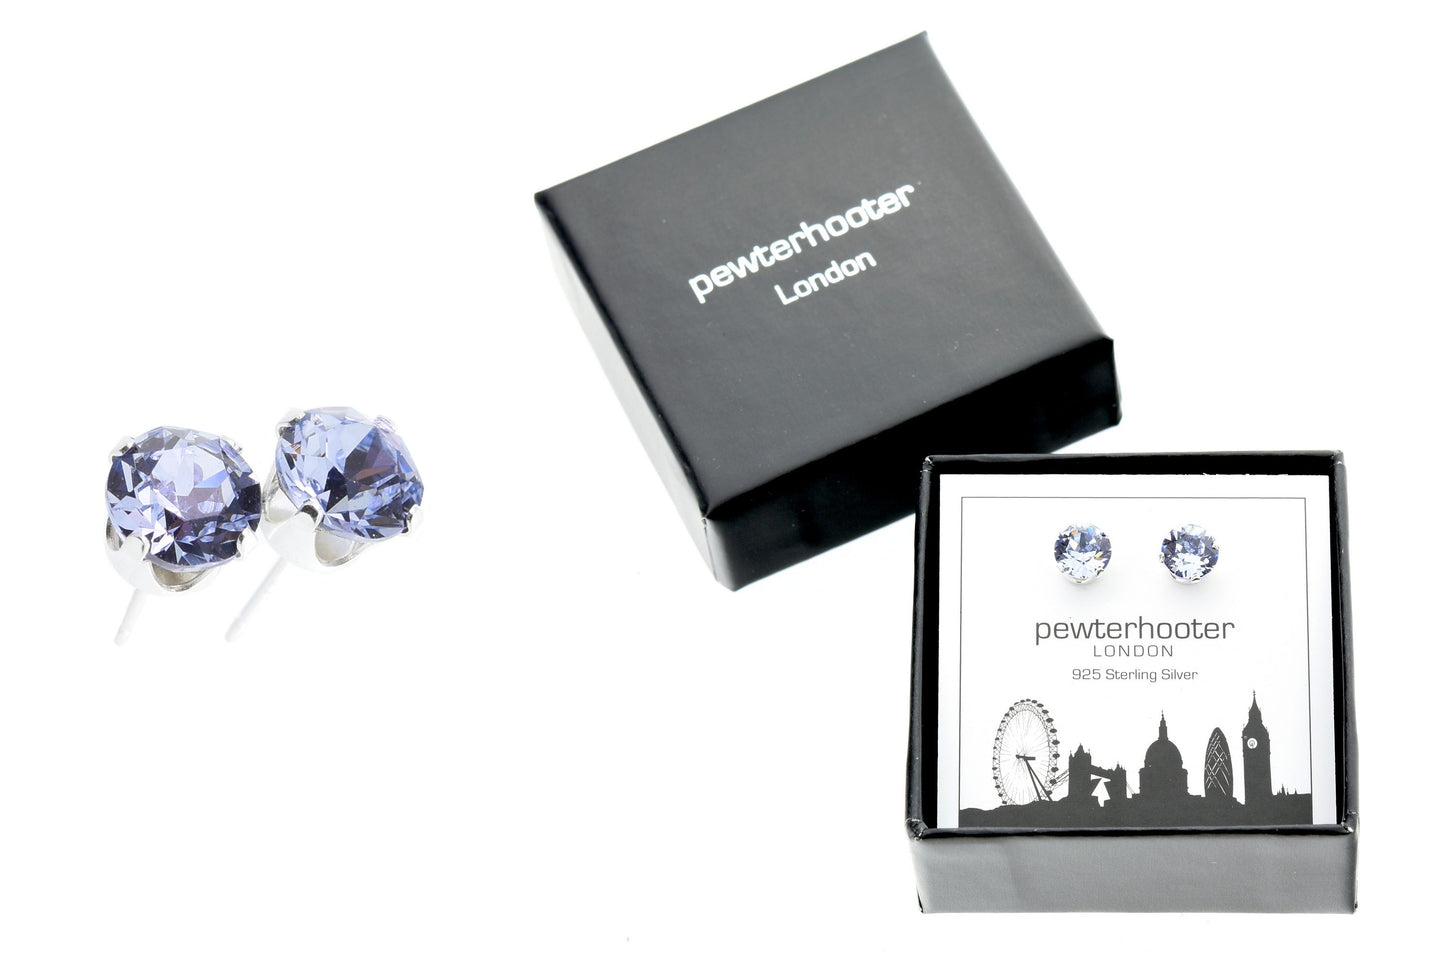 pewterhooter® Women's Classic Collection 925 Sterling silver earrings with sparkling Provence Lavender crystals, packaged in a gift box for any occasion.